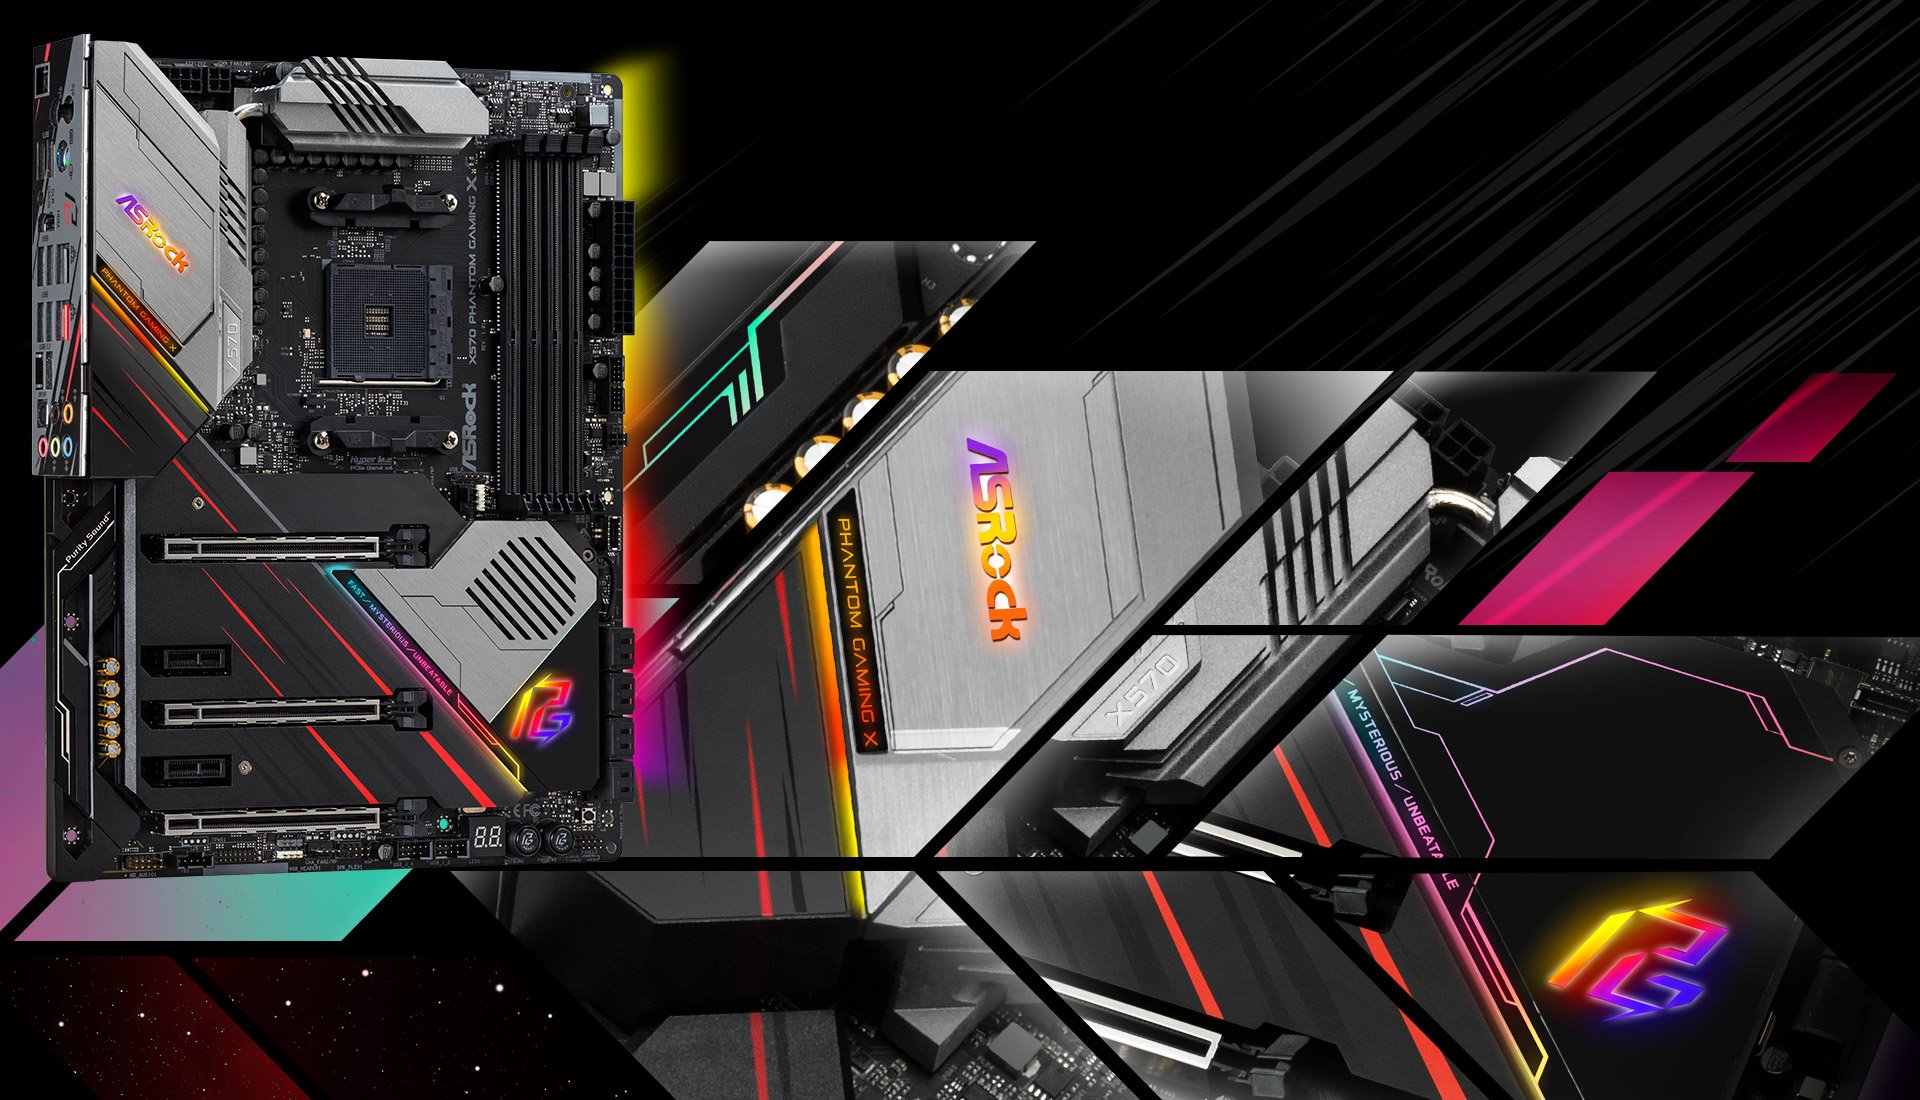 ASRock X570 Taichi Motherboard, Standing Up, Slightly ANgled to the Right with Graphics Showing Its RGB Lighting along with a geometrically split background image showing pieces of the motherboard